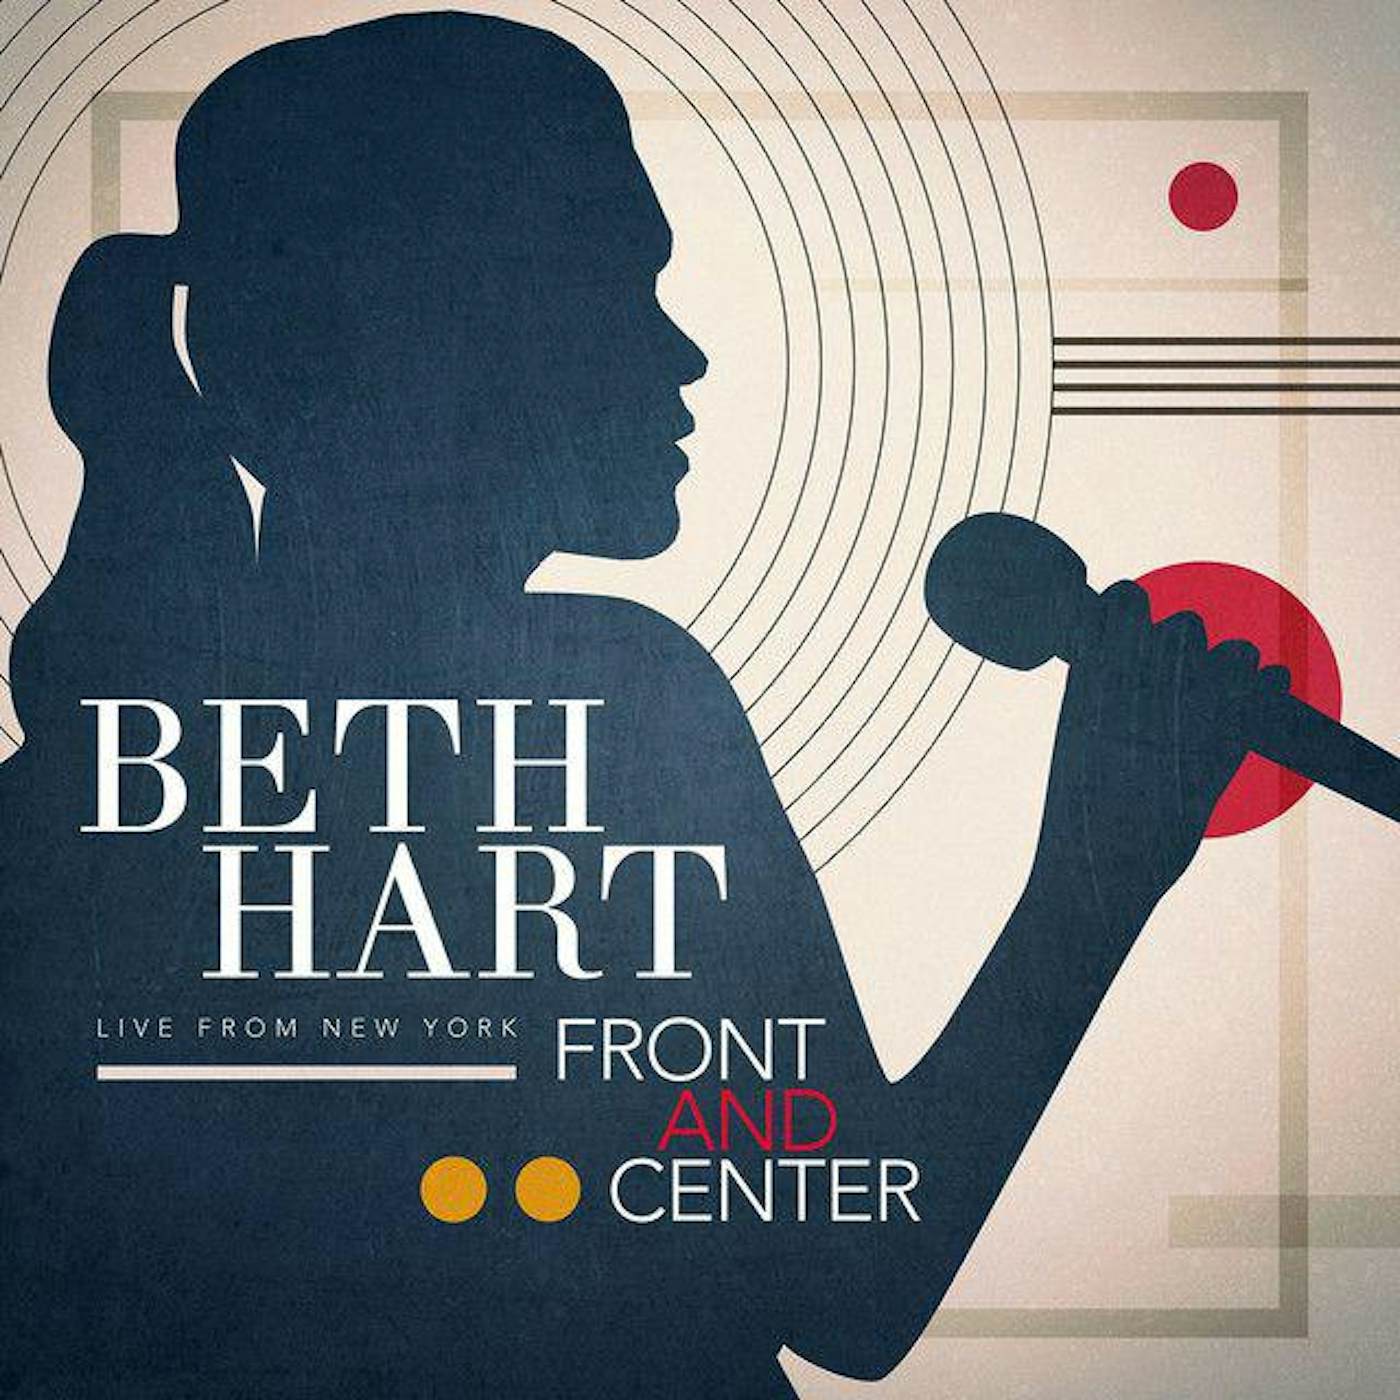 Beth Hart FRONT & CENTER - LIVE FROM NEW YORK (2LP) Vinyl Record